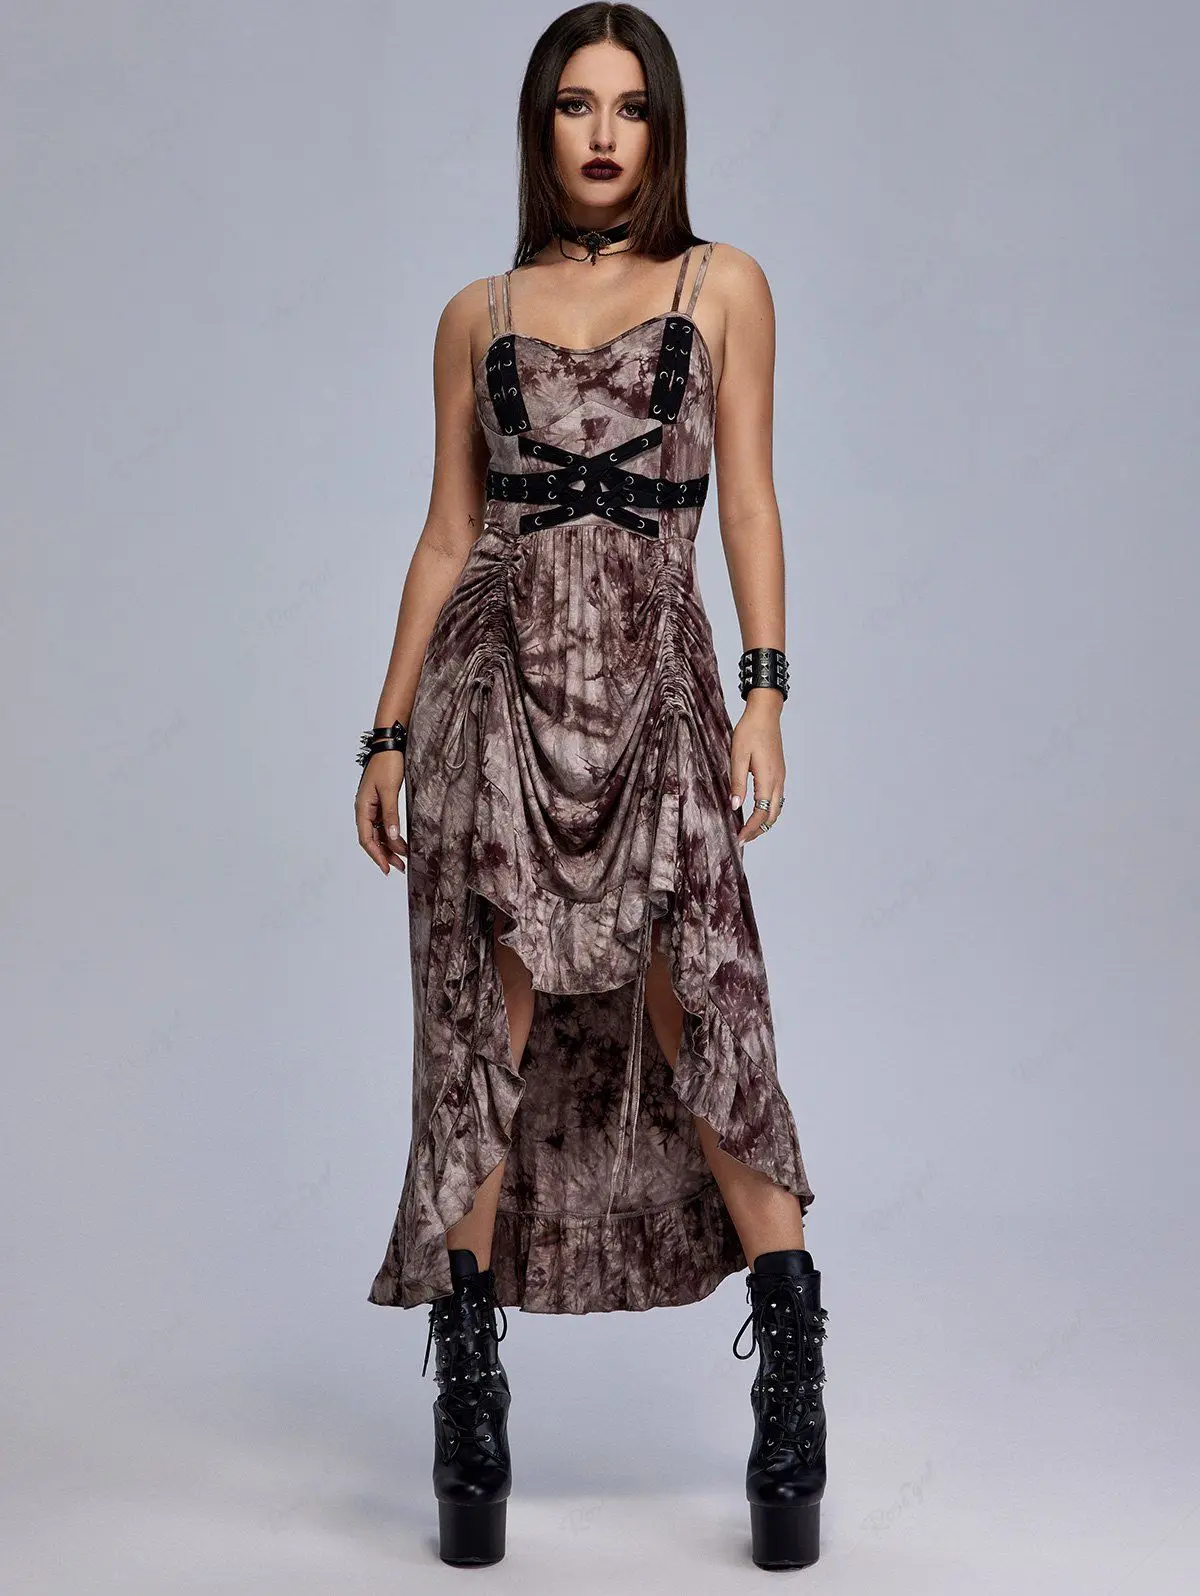 

Kenancy Gothic Steampunk Tie Dye Grommets Crisscross Ruffle Cinched Ruched Maxi Dress (Adjustable Straps)